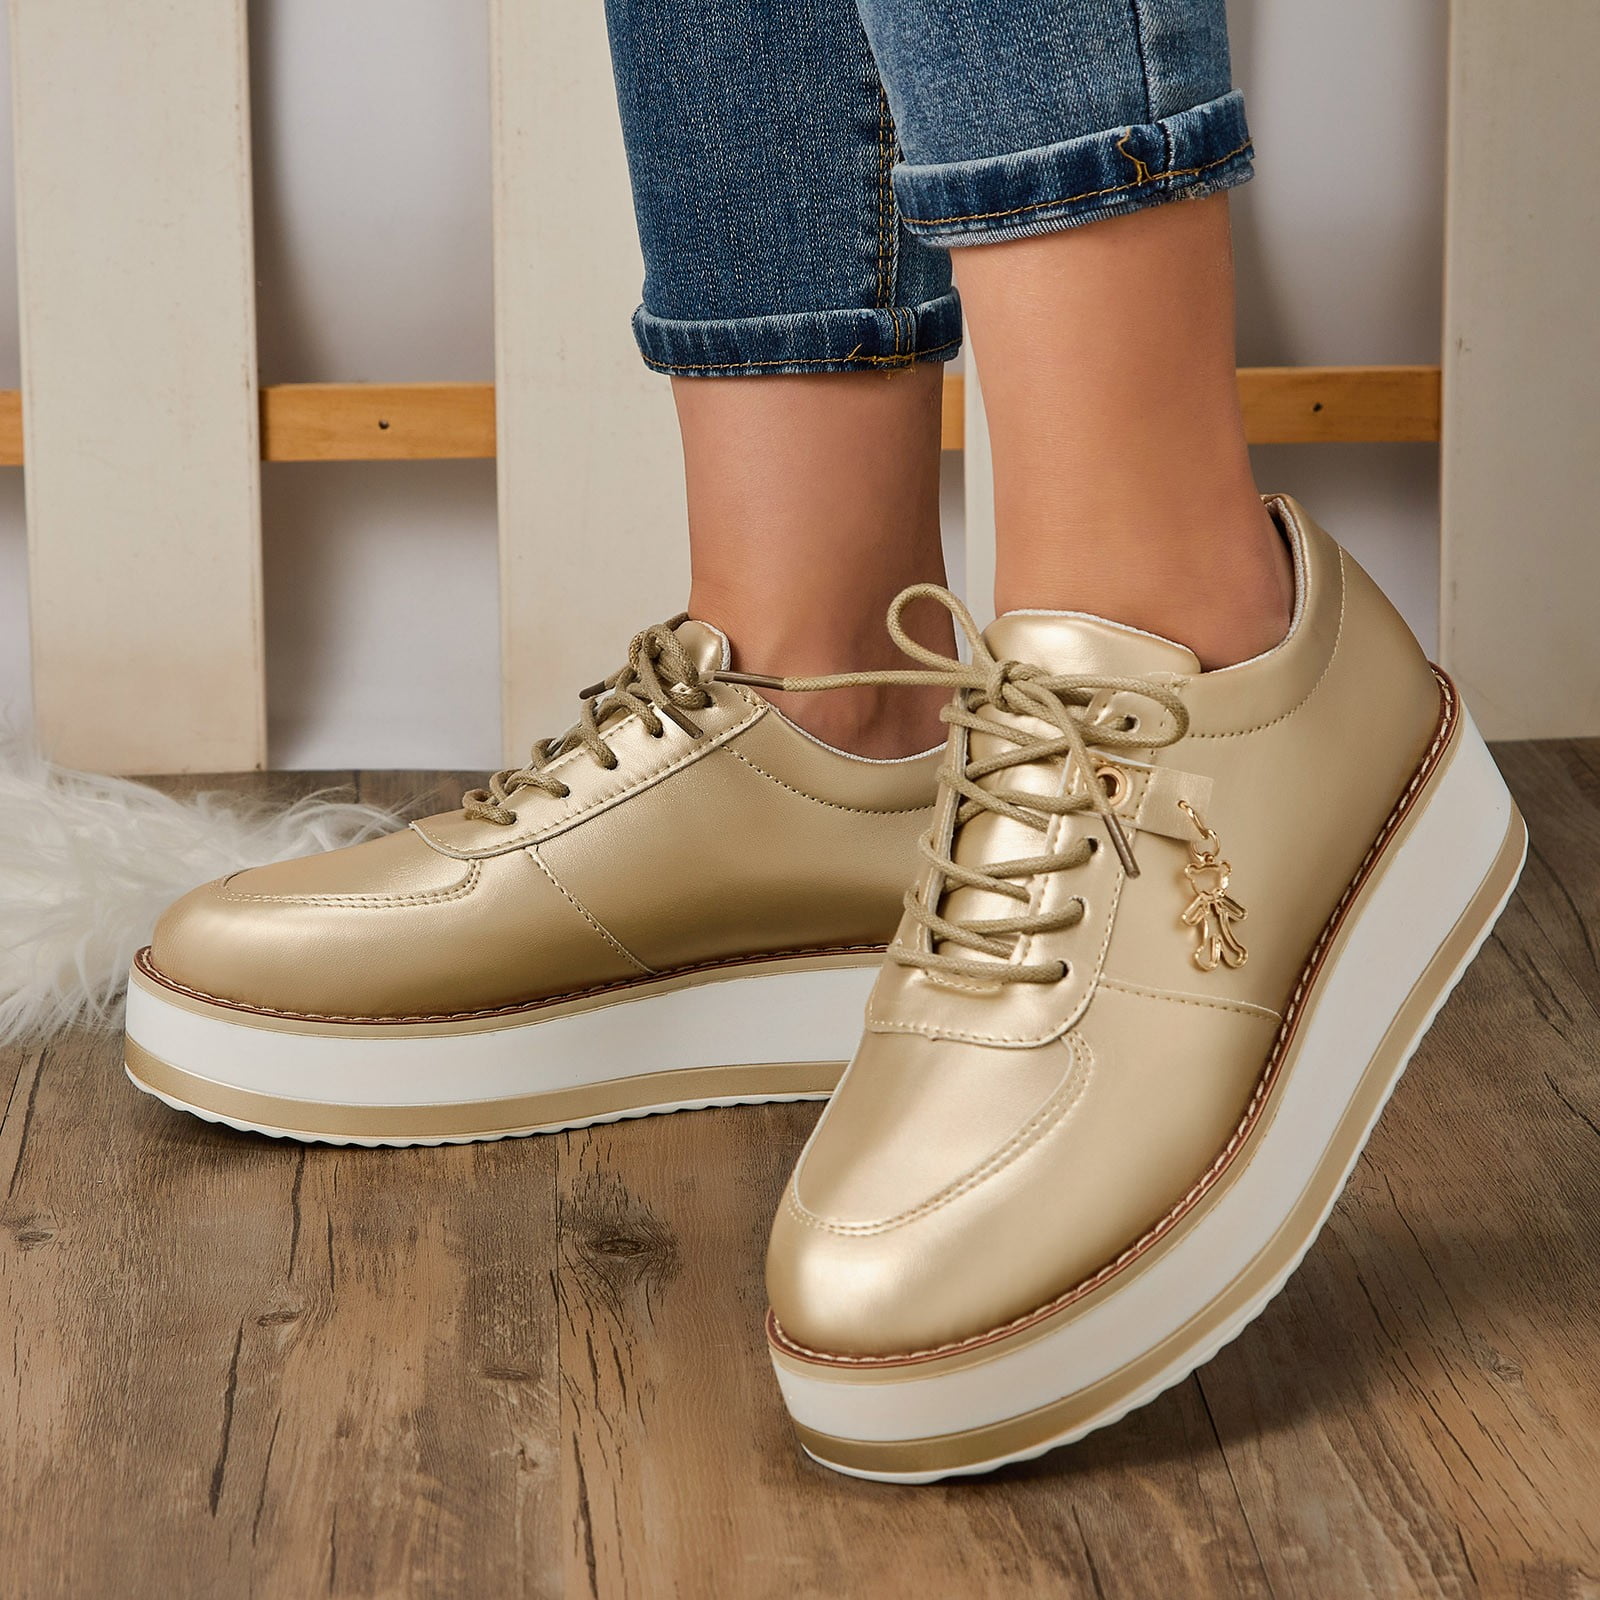 Women Shoes Fashion Solid Color Leather Round Toe Lace Up Platform